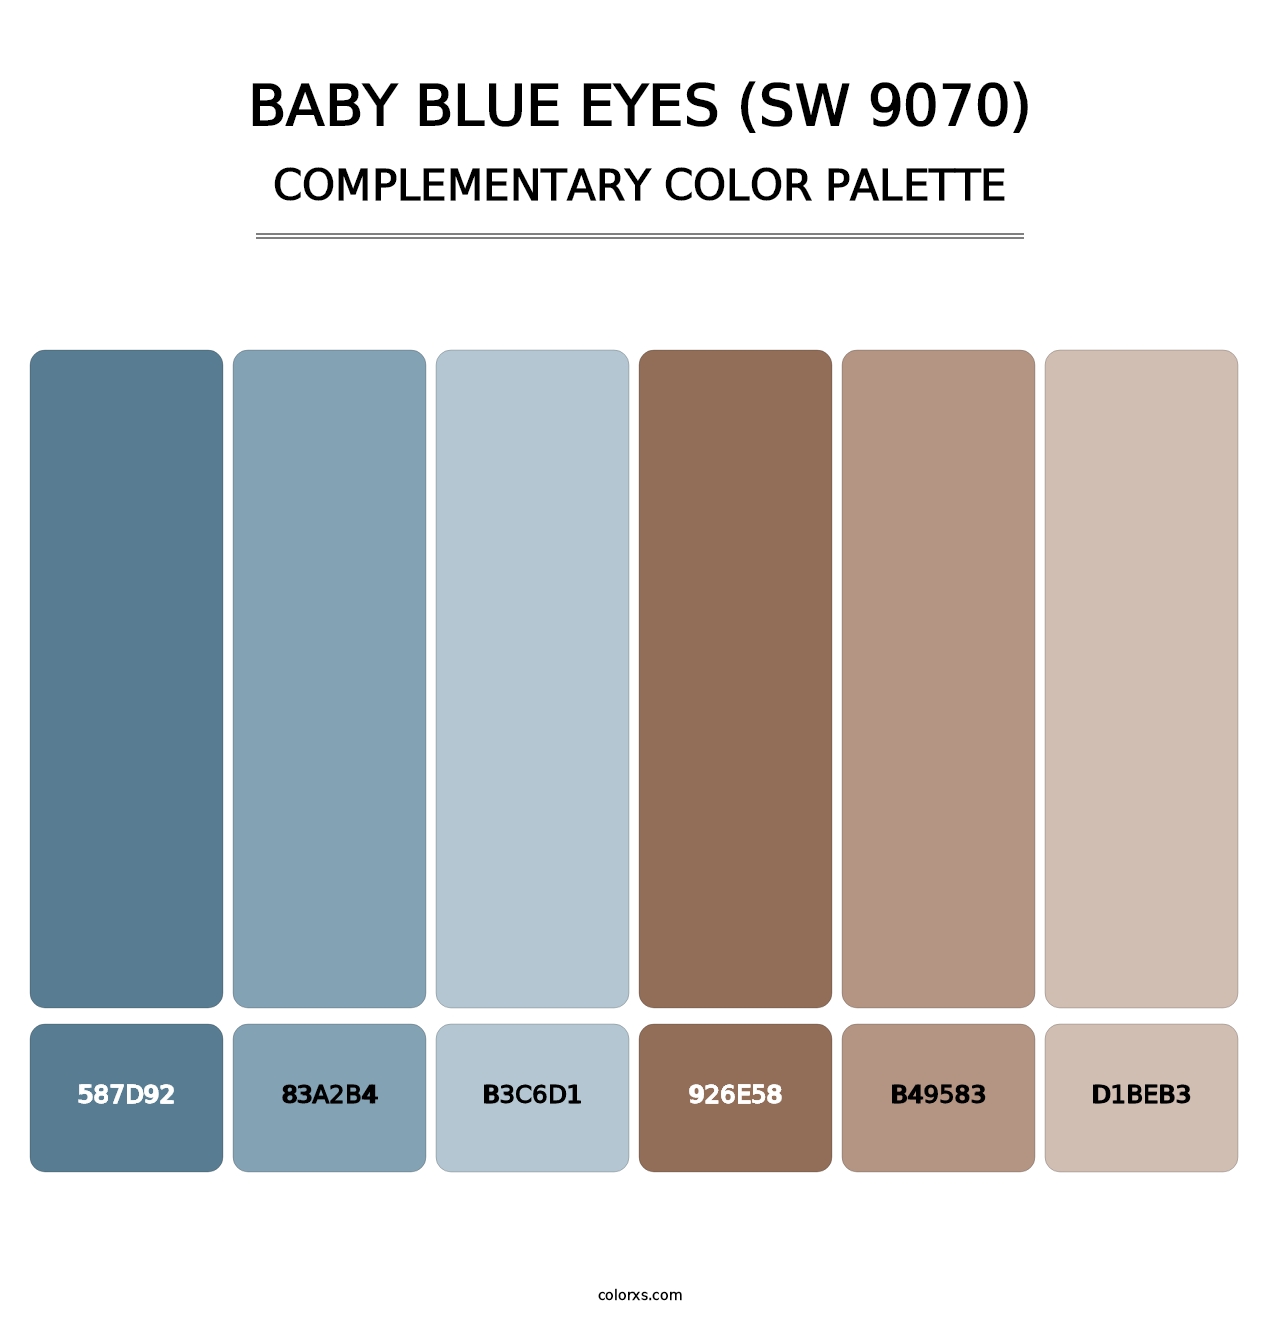 Baby Blue Eyes (SW 9070) - Complementary Color Palette